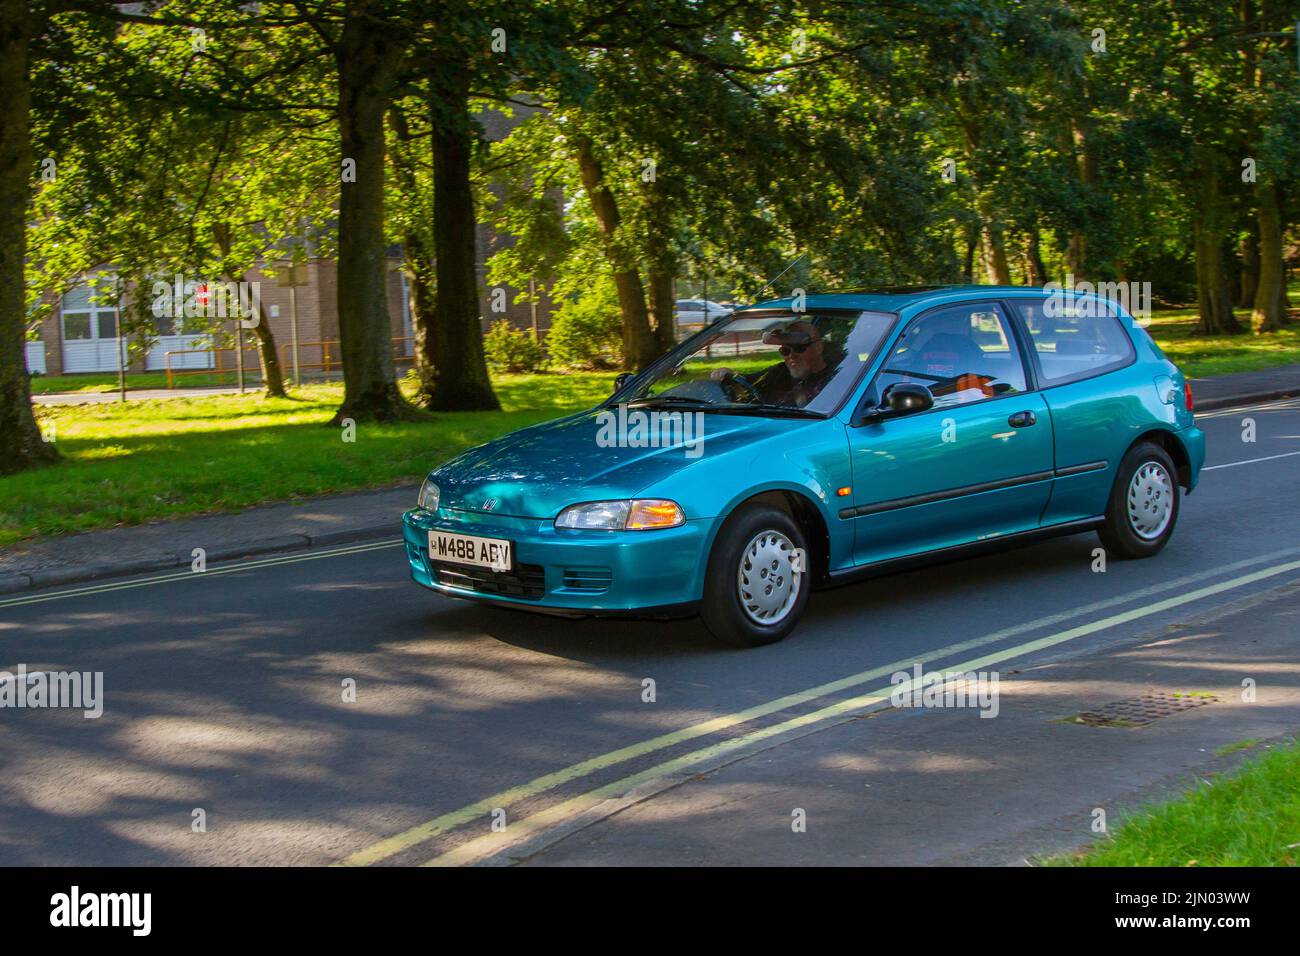 1994 90s, nineties green HONDA CIVIC BALI 1343cc petrol 5 Speed manual vintage car; at the 13th Lytham Hall Classic Car Show of Vintage Collectible Transport Festival vehicles. Stock Photo